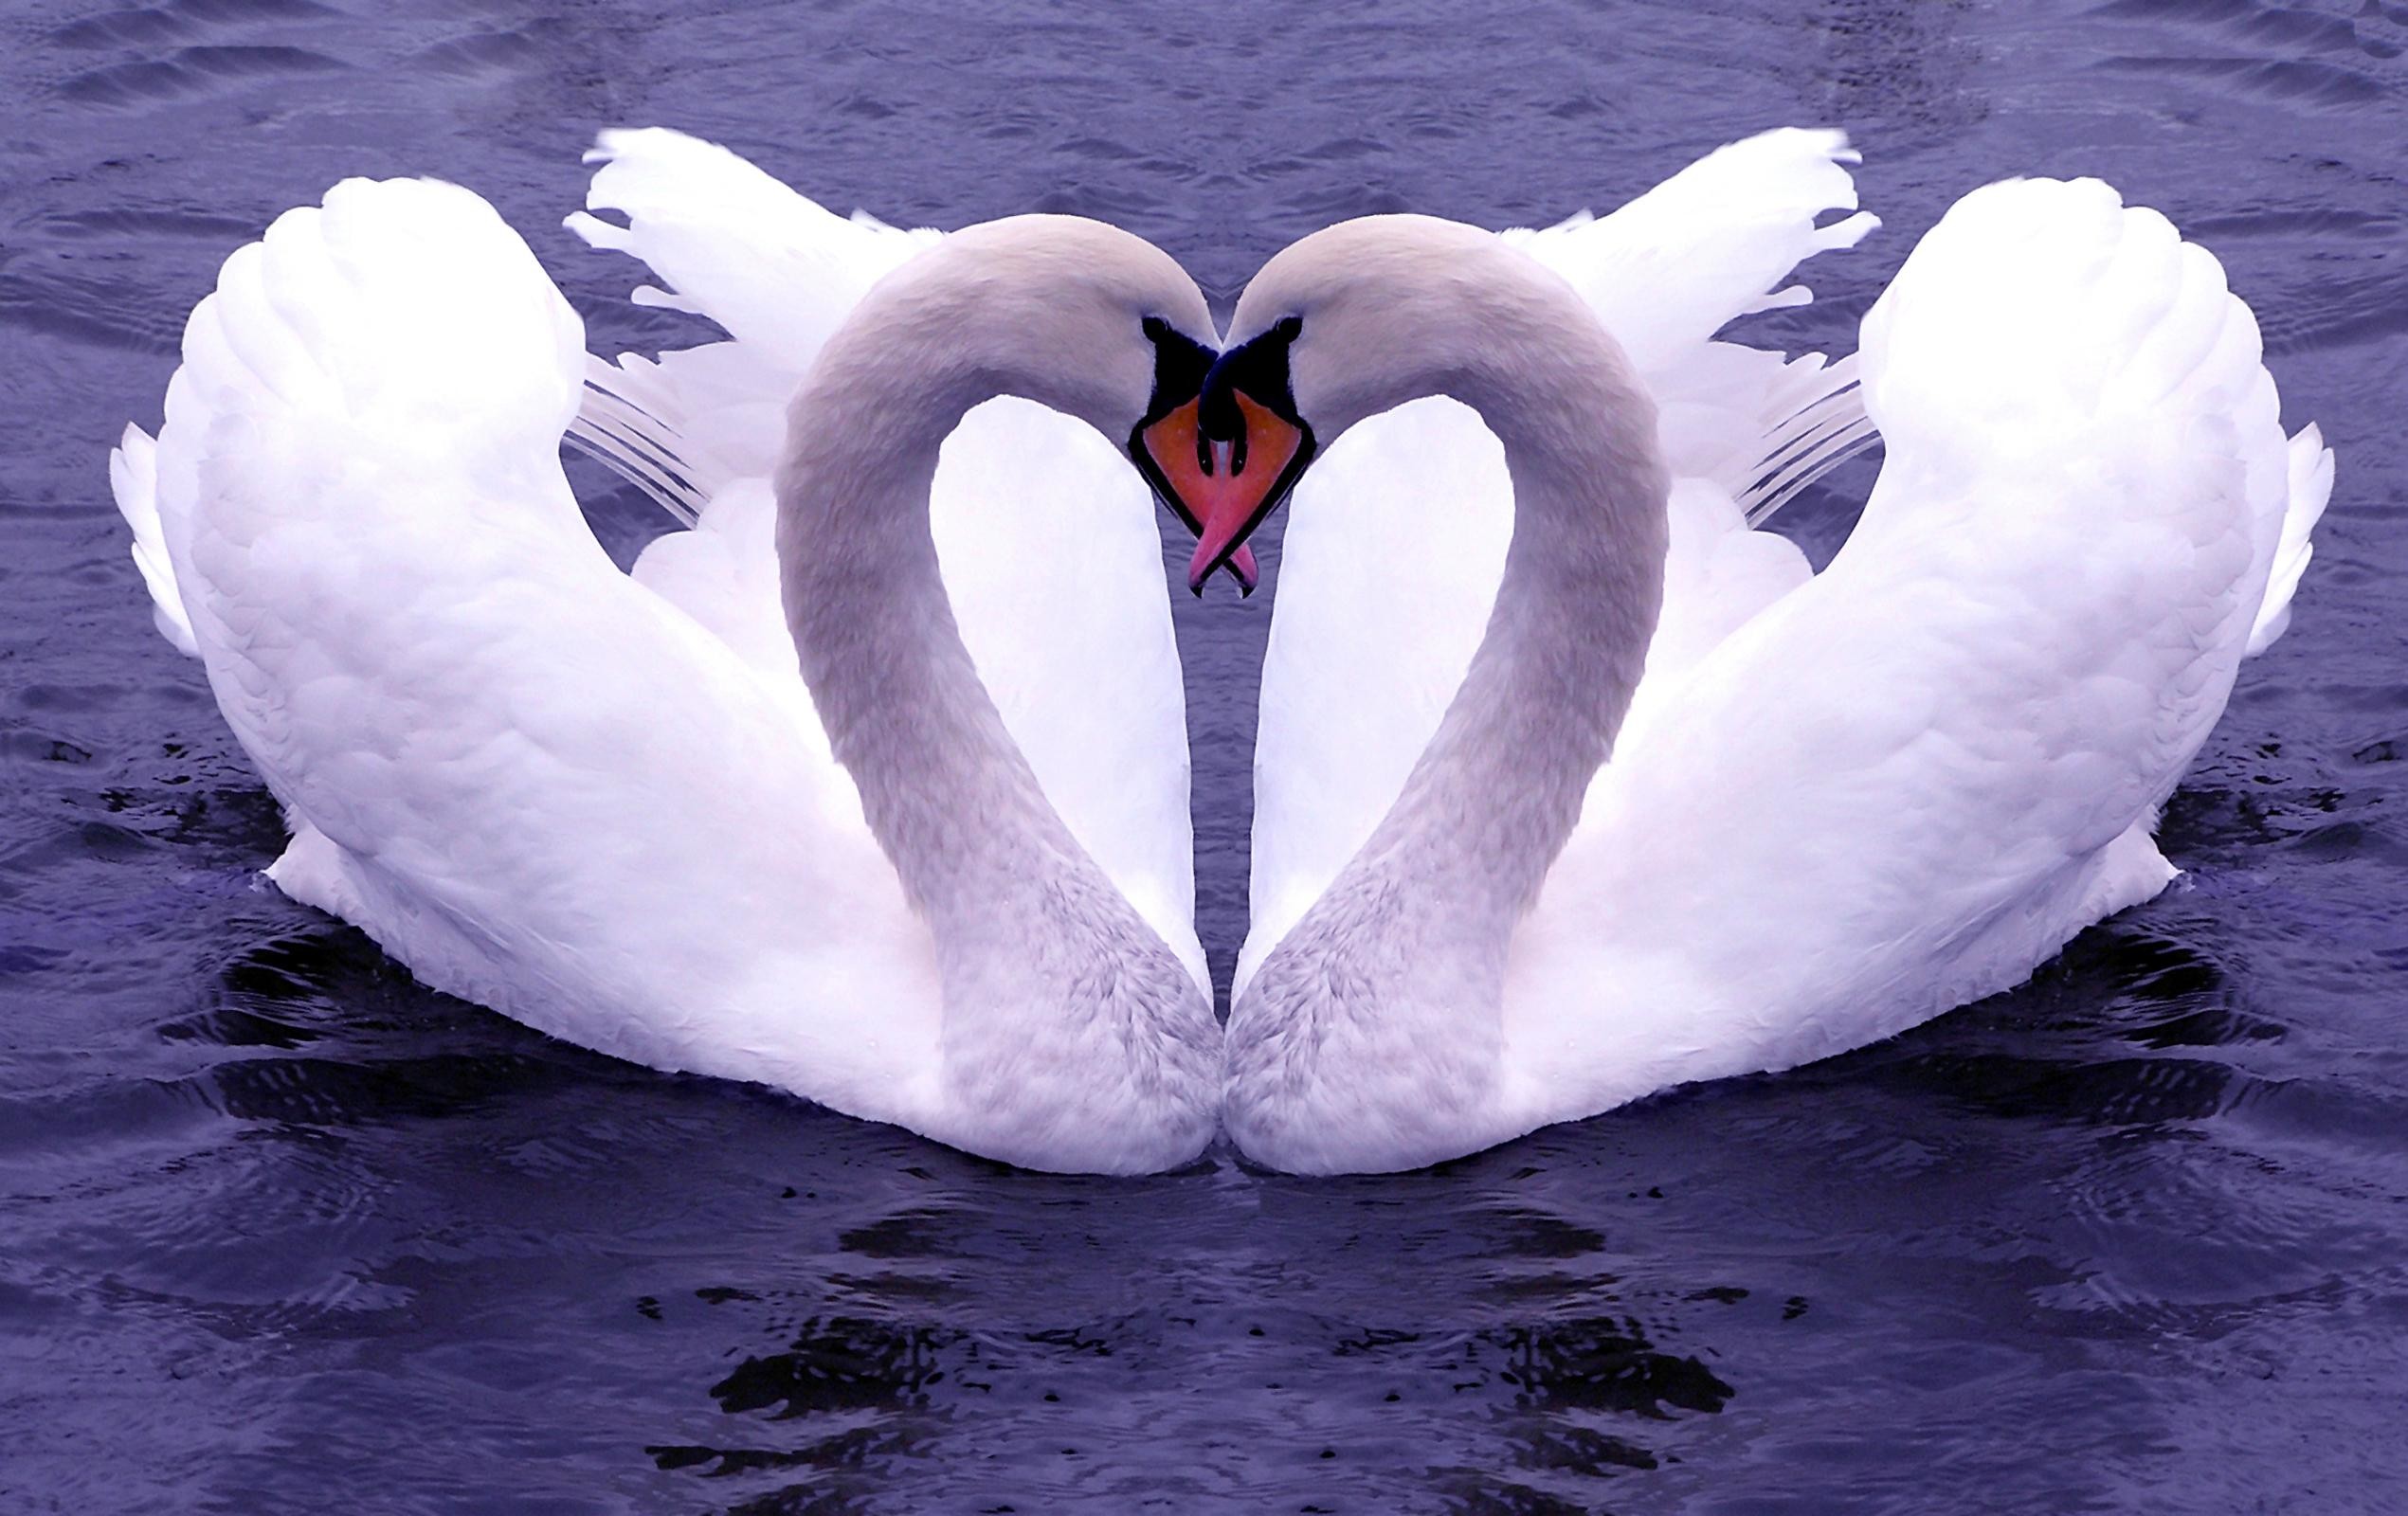 décor nirmal 80 cm white swans picture, cute swan wallpaper, most  decorative swan pictures, full hd swans photos, water swimming swans, black  & white photos, Fully waterpruf picture, size [80x50] Self Adhesive